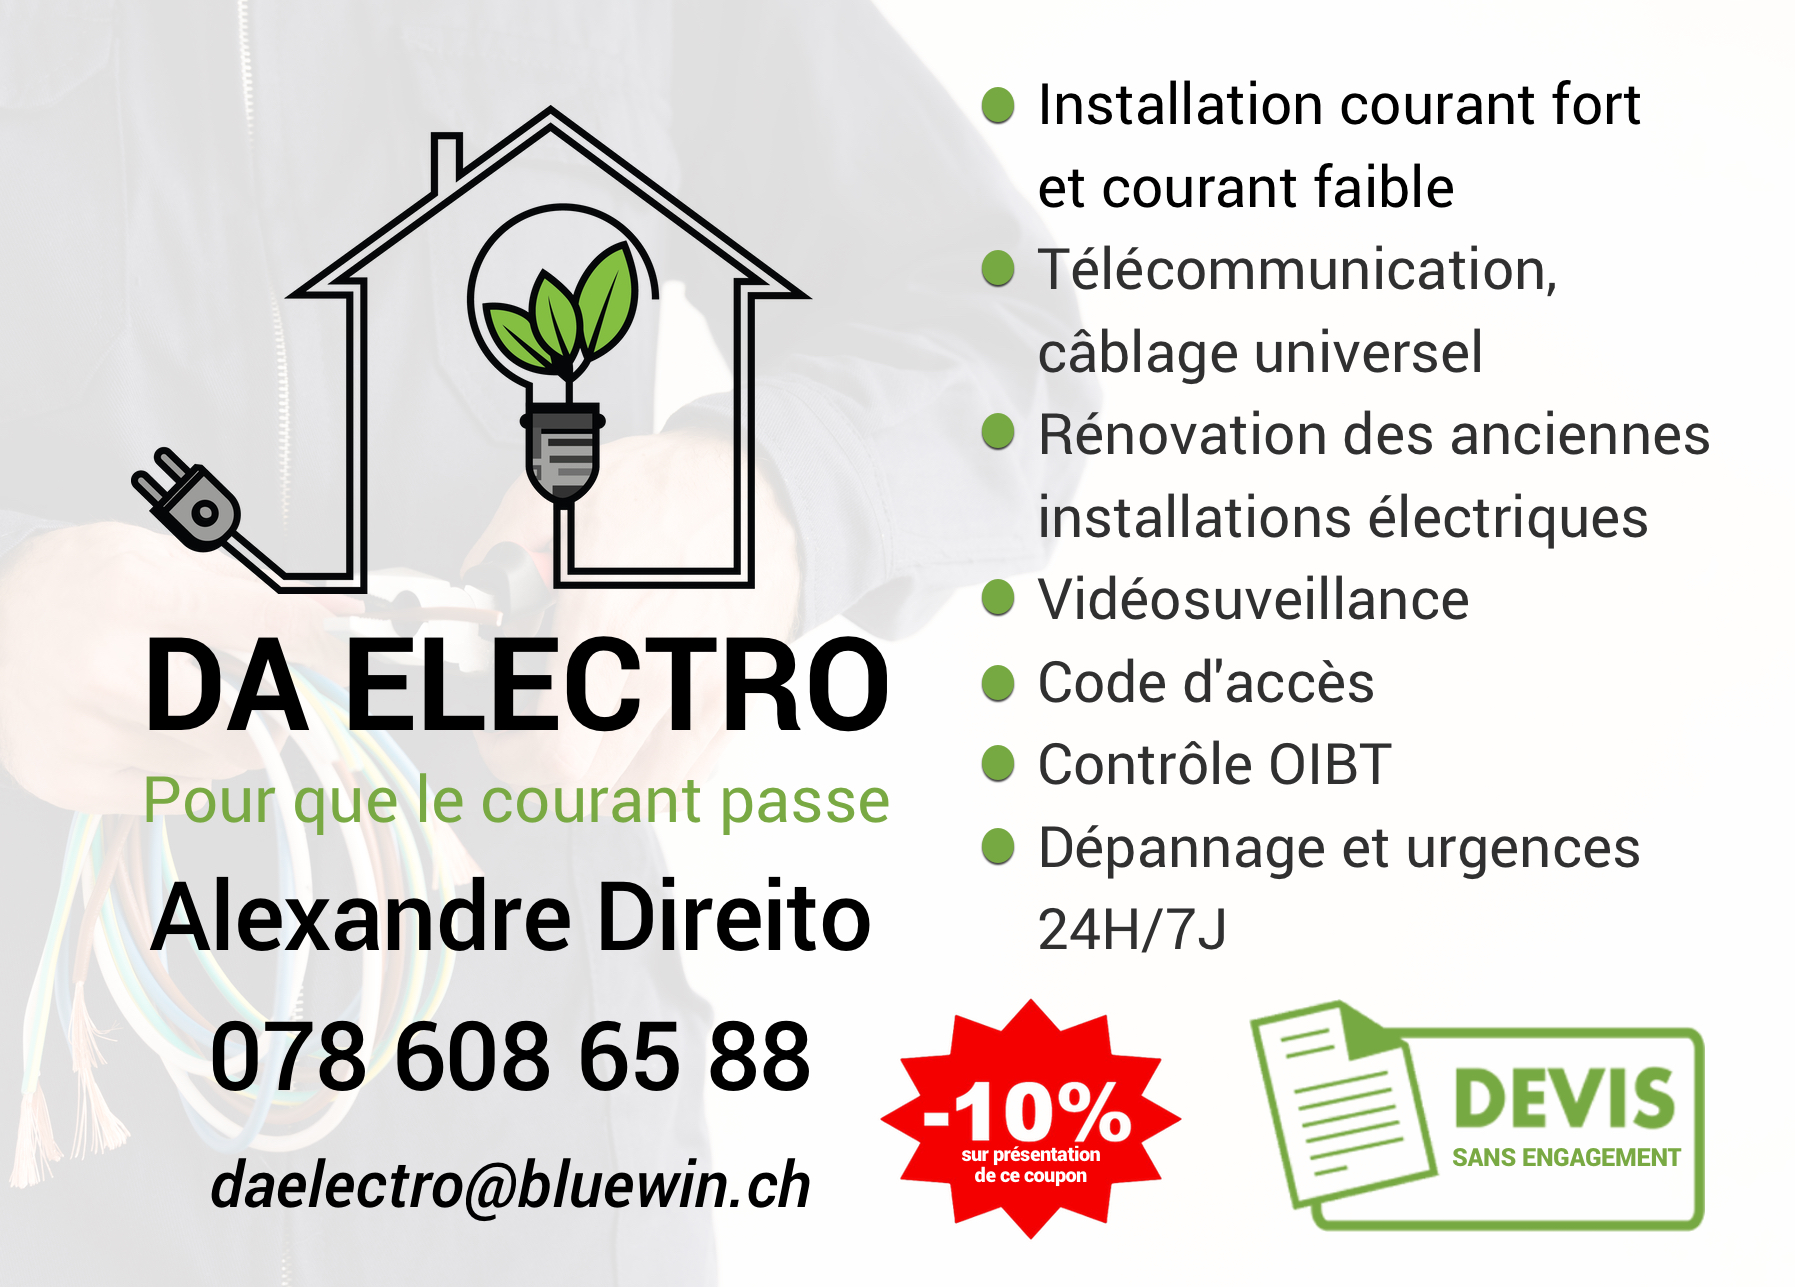 daelectro.ch